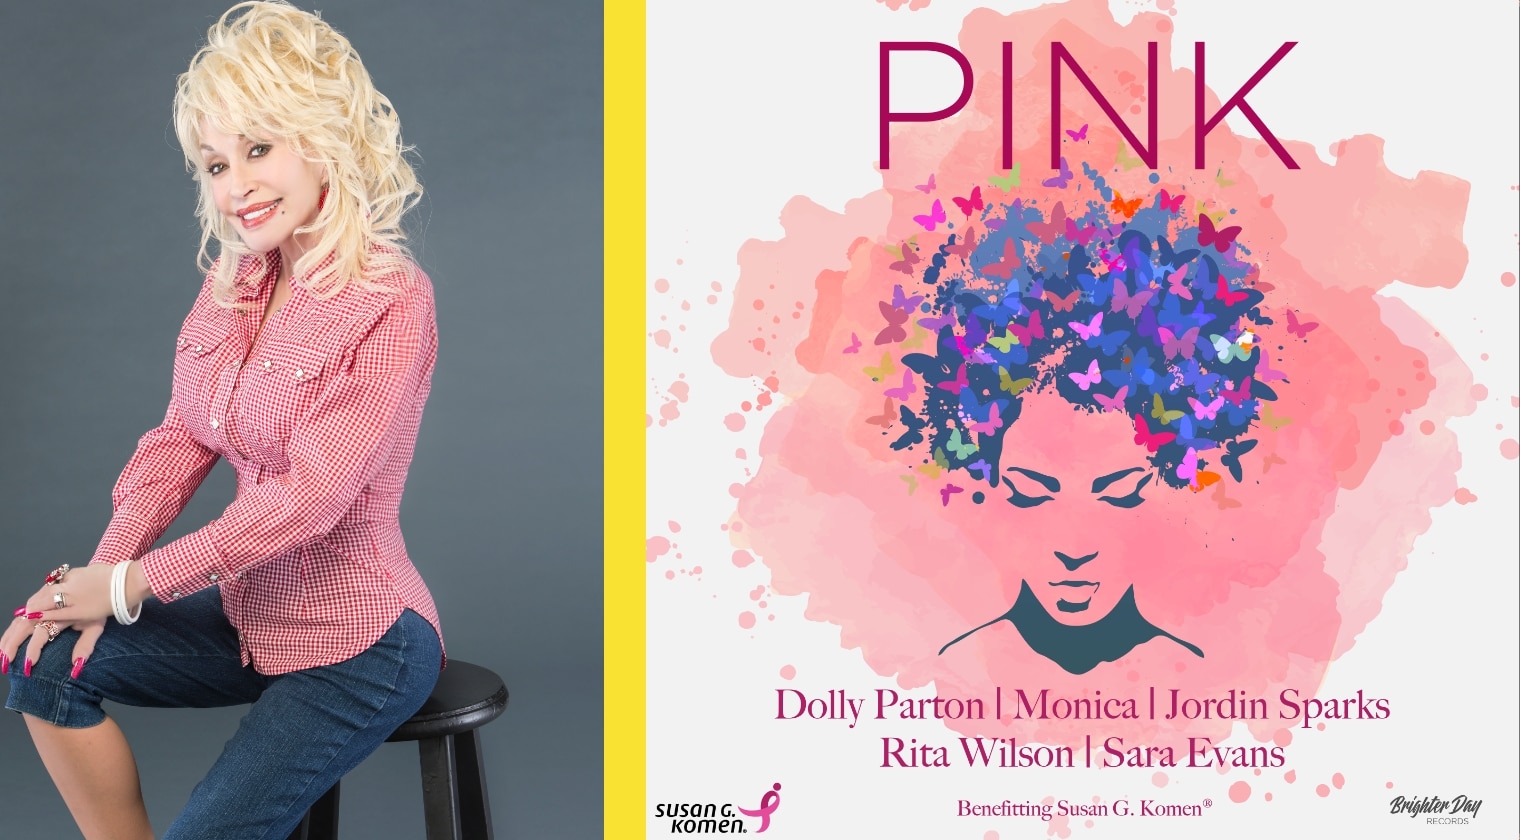 Dolly Parton & Sara Evans Featured On New Song To Fight Breast Cancer | Country Music Videos